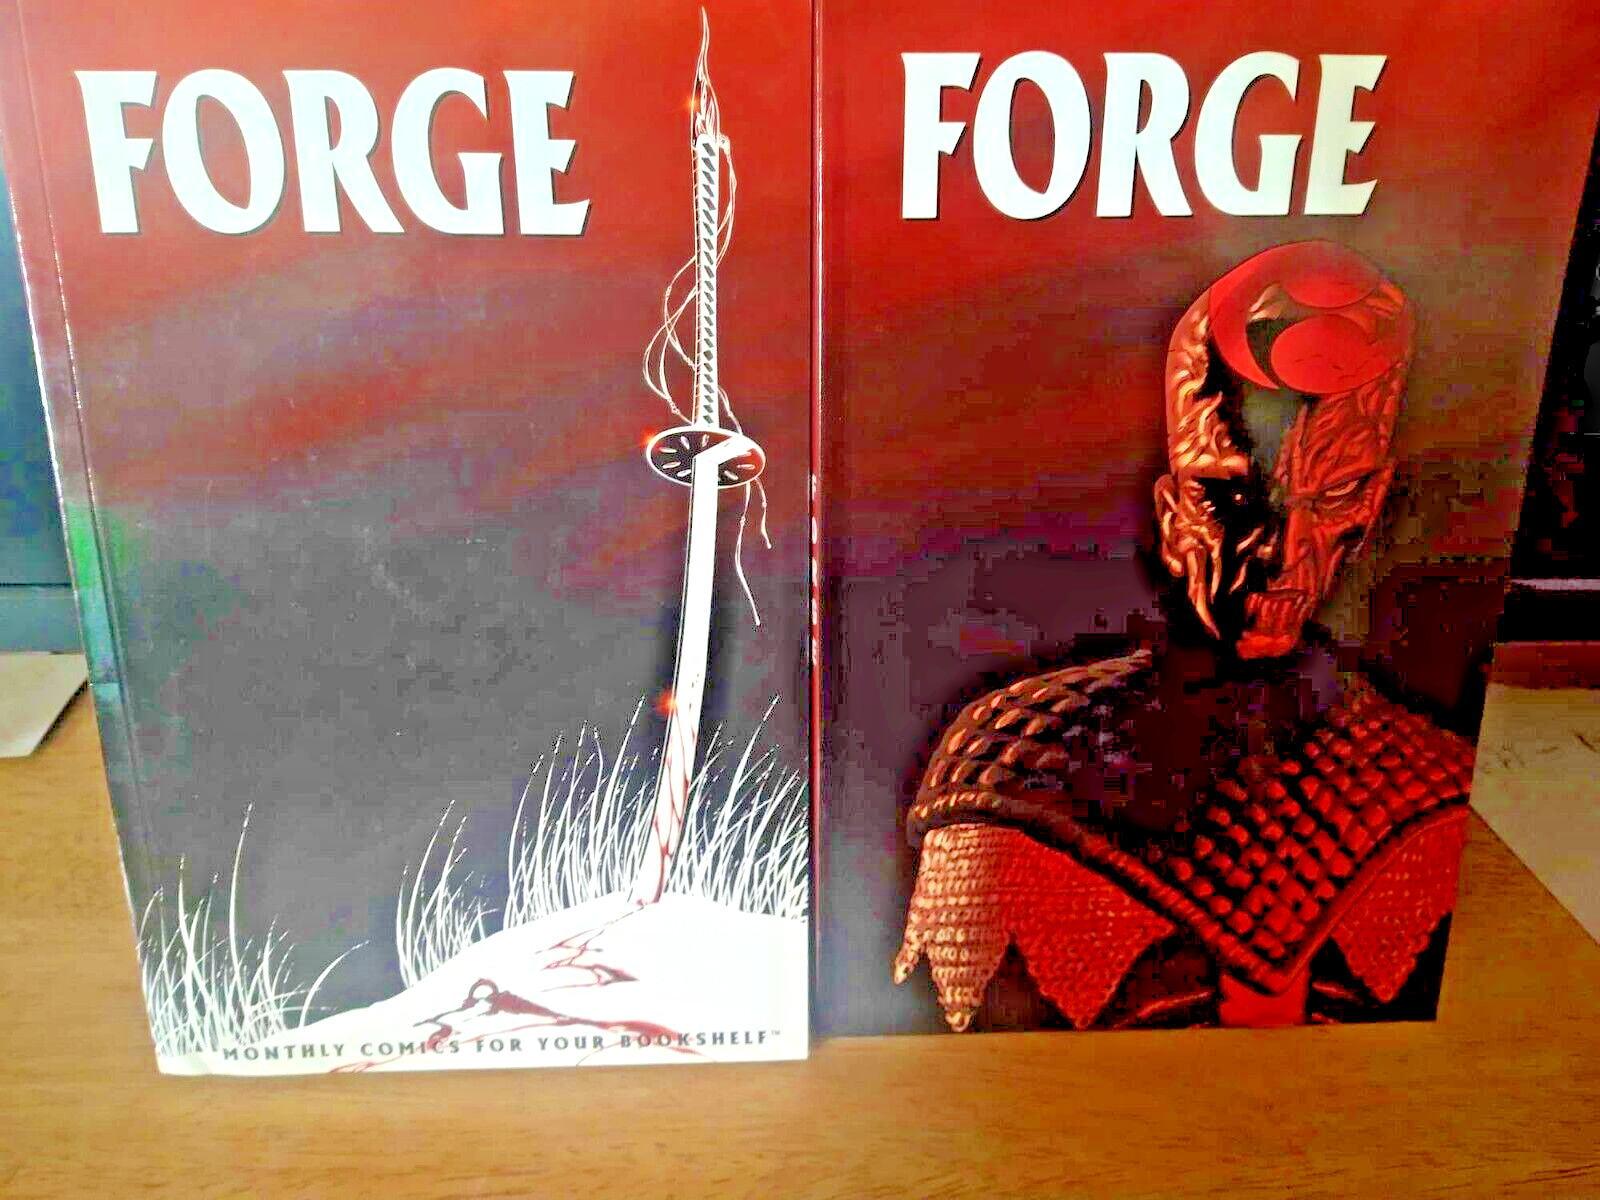 FORGE volume 1 & 2 By Ron Marx Trade paperback Graphic Novels CROSSGEN comics